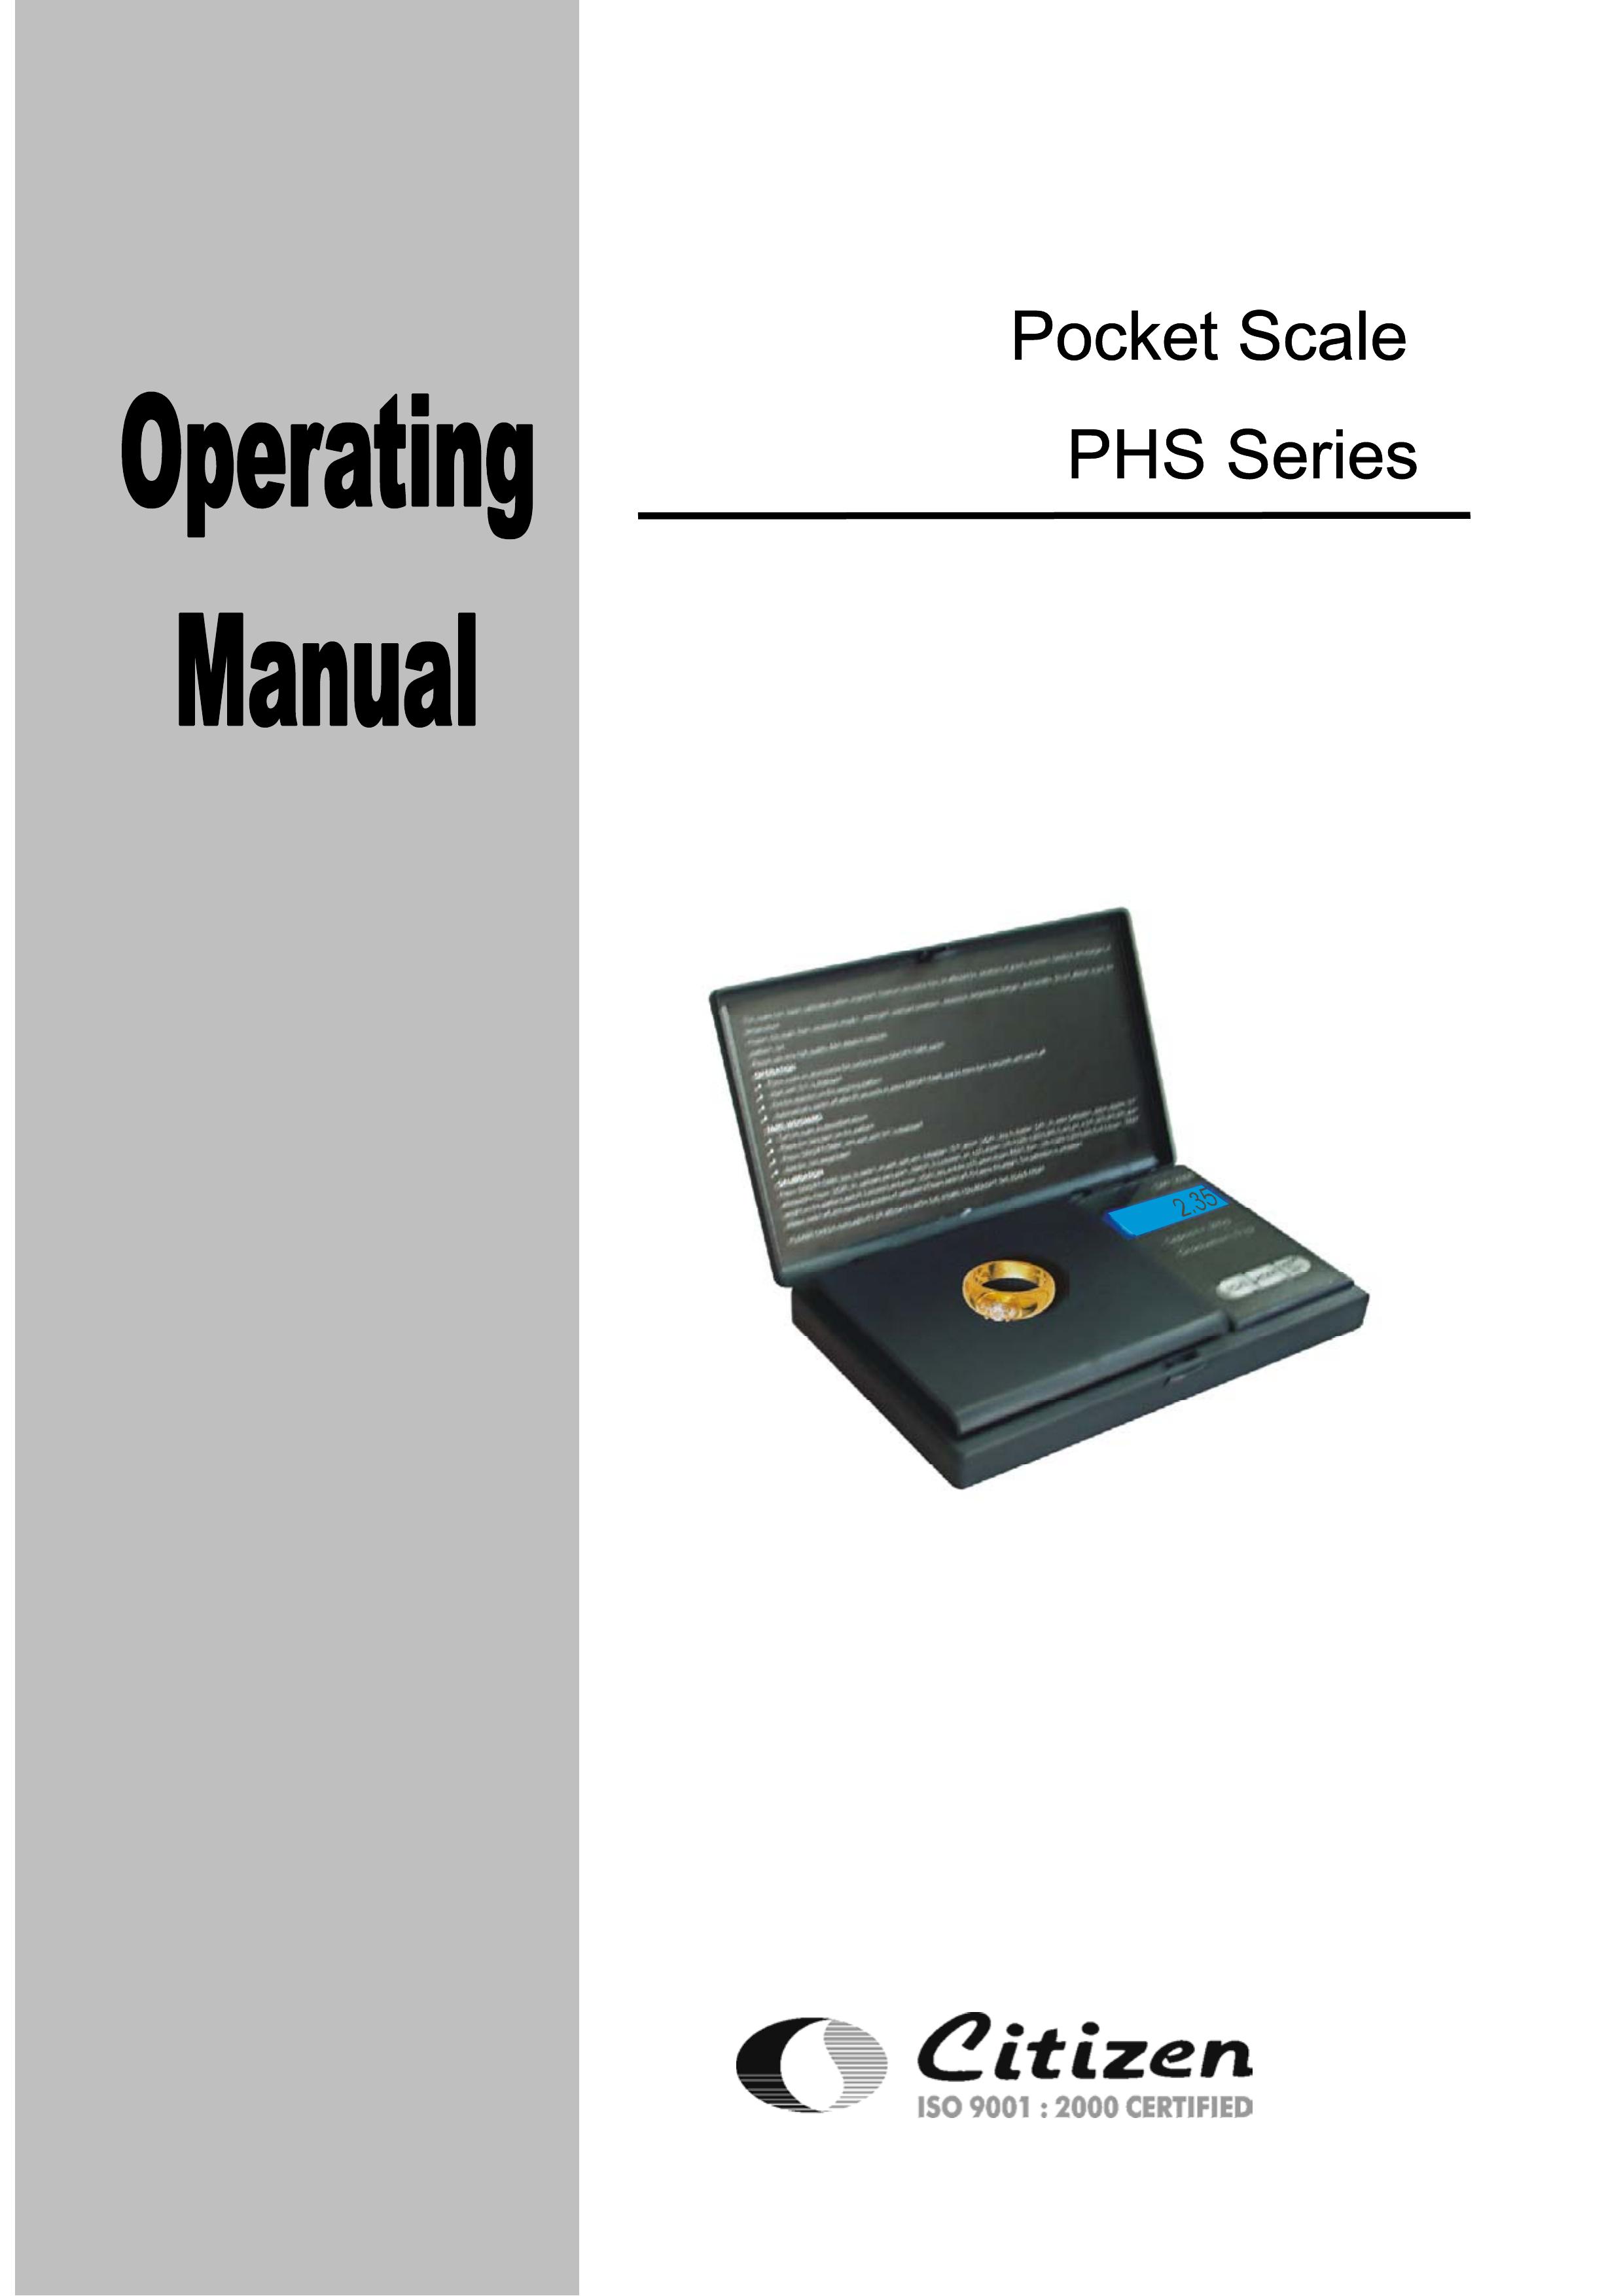 Citizen PHS 100 Scale User Manual